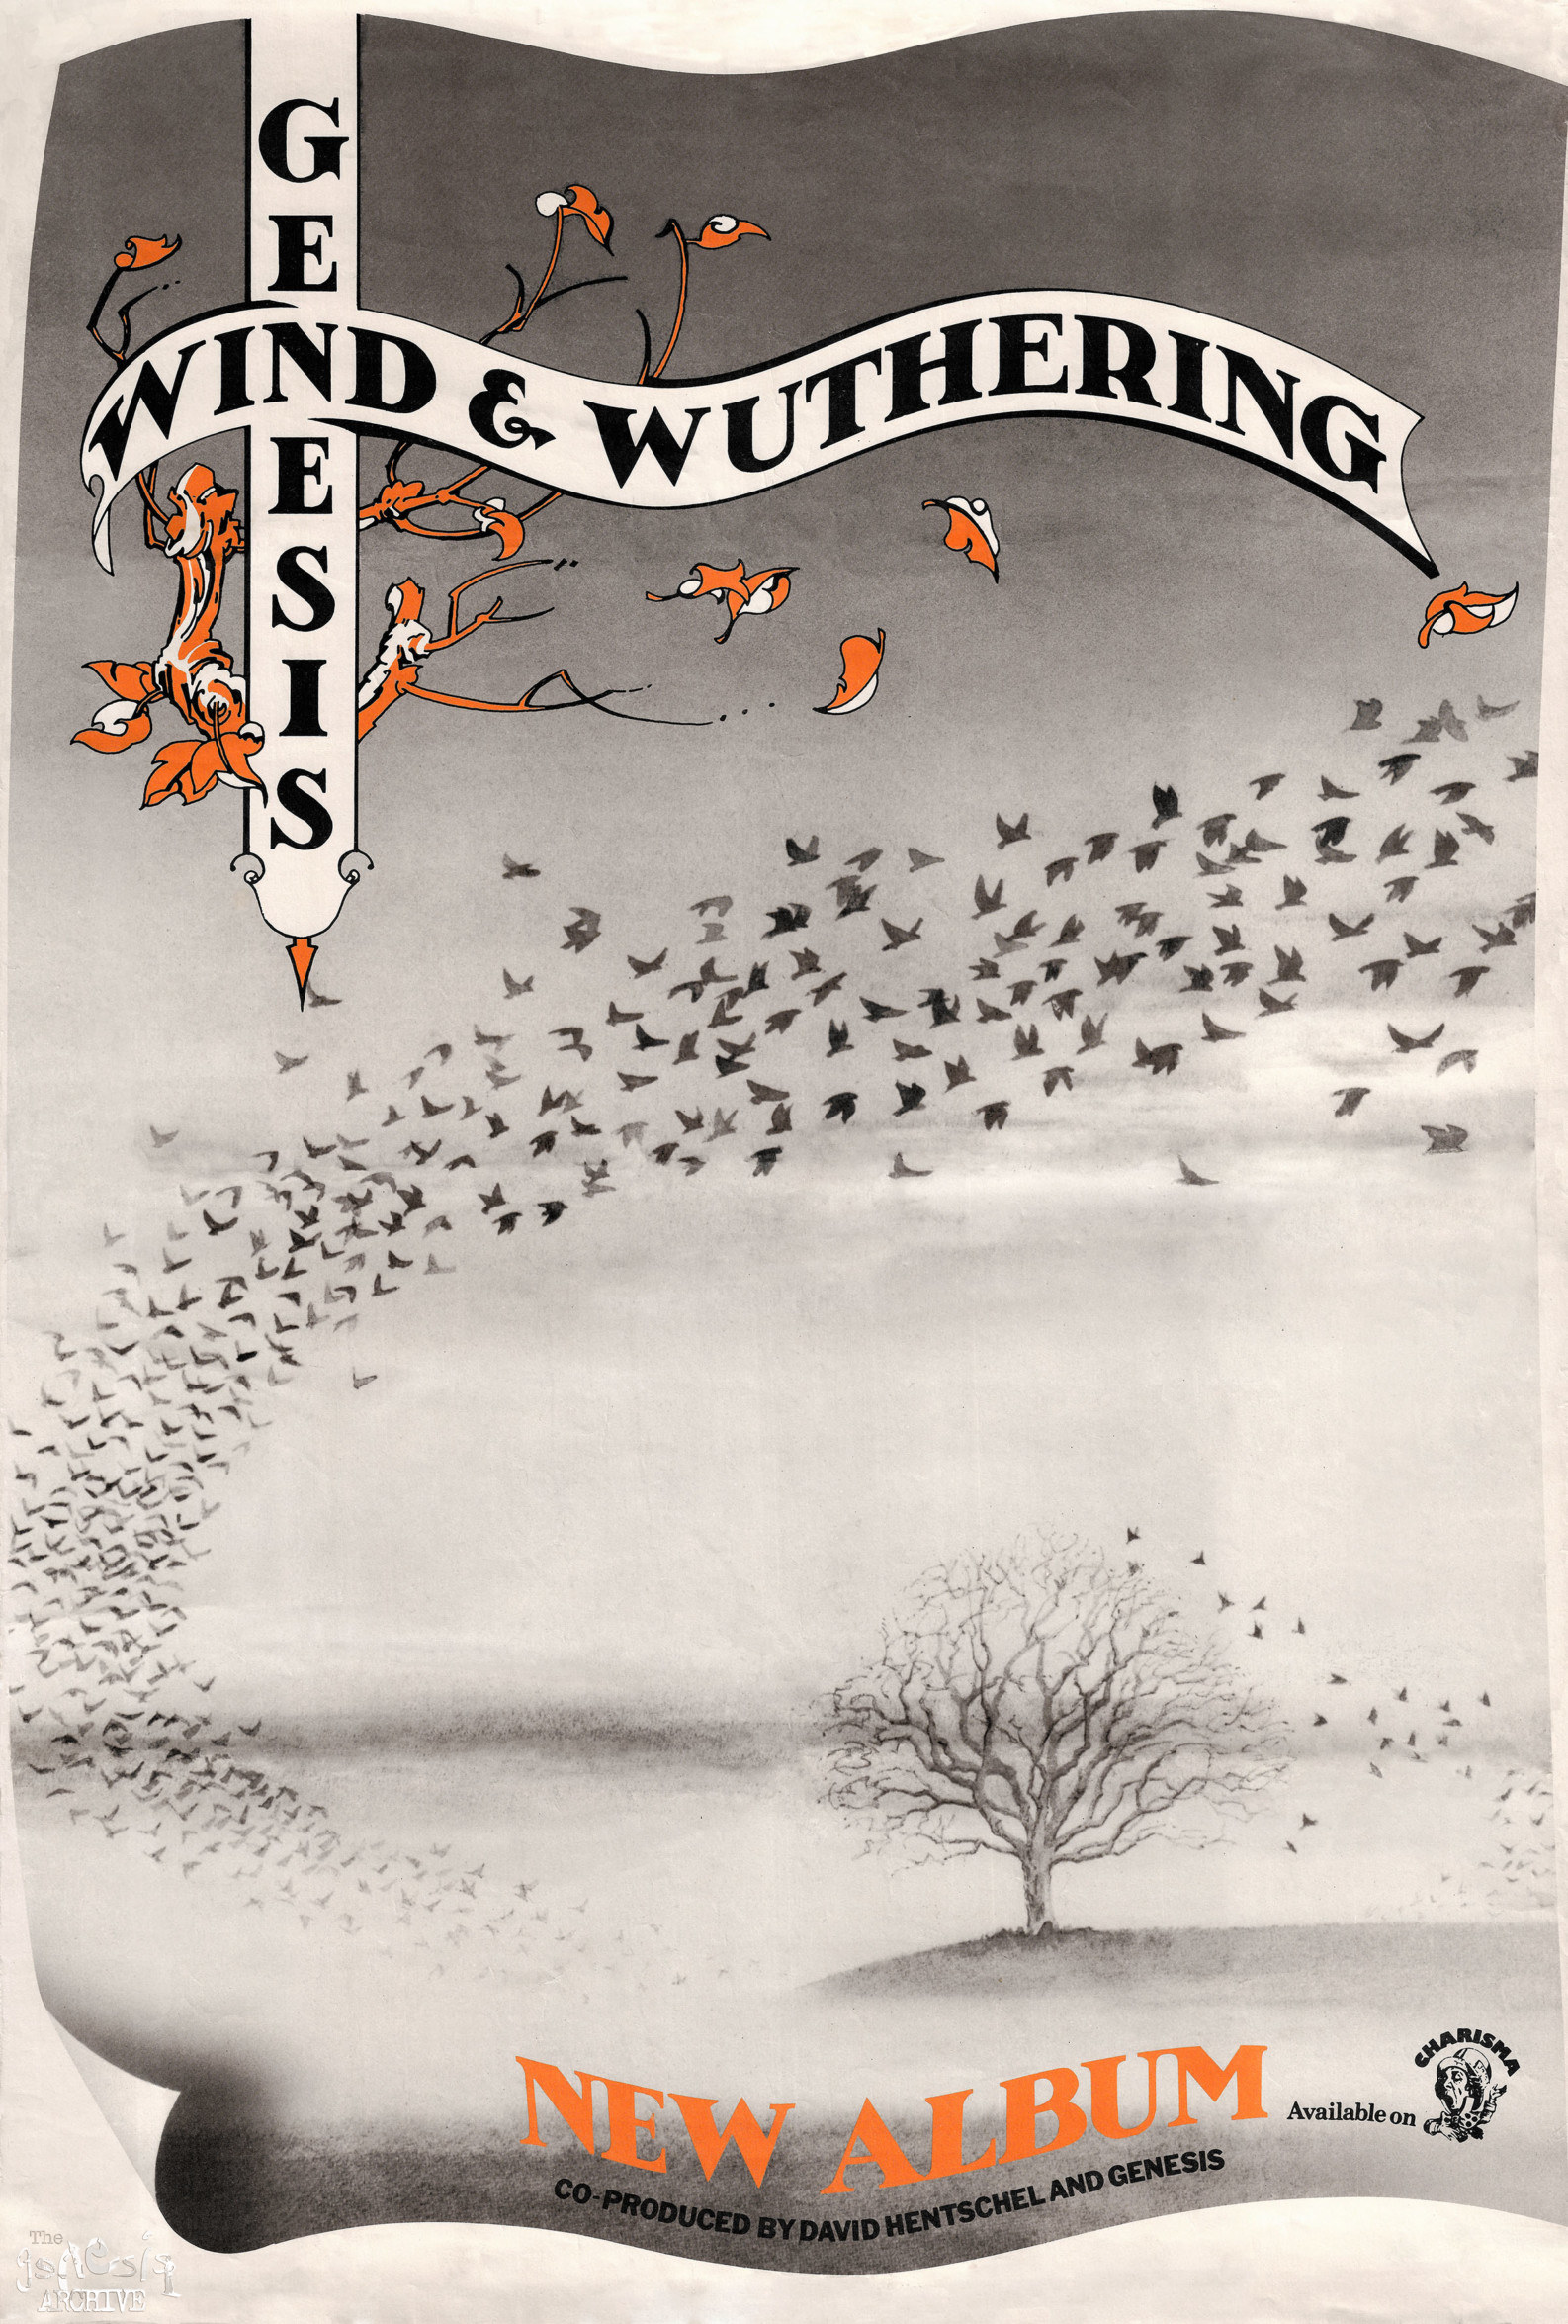 Wuthering waves будет русский язык в игре. Genesis Wind and Wuthering 1976. Genesis "Wind & Wuthering". Обложка альбома Генезис. Genesis обложки альбомов.